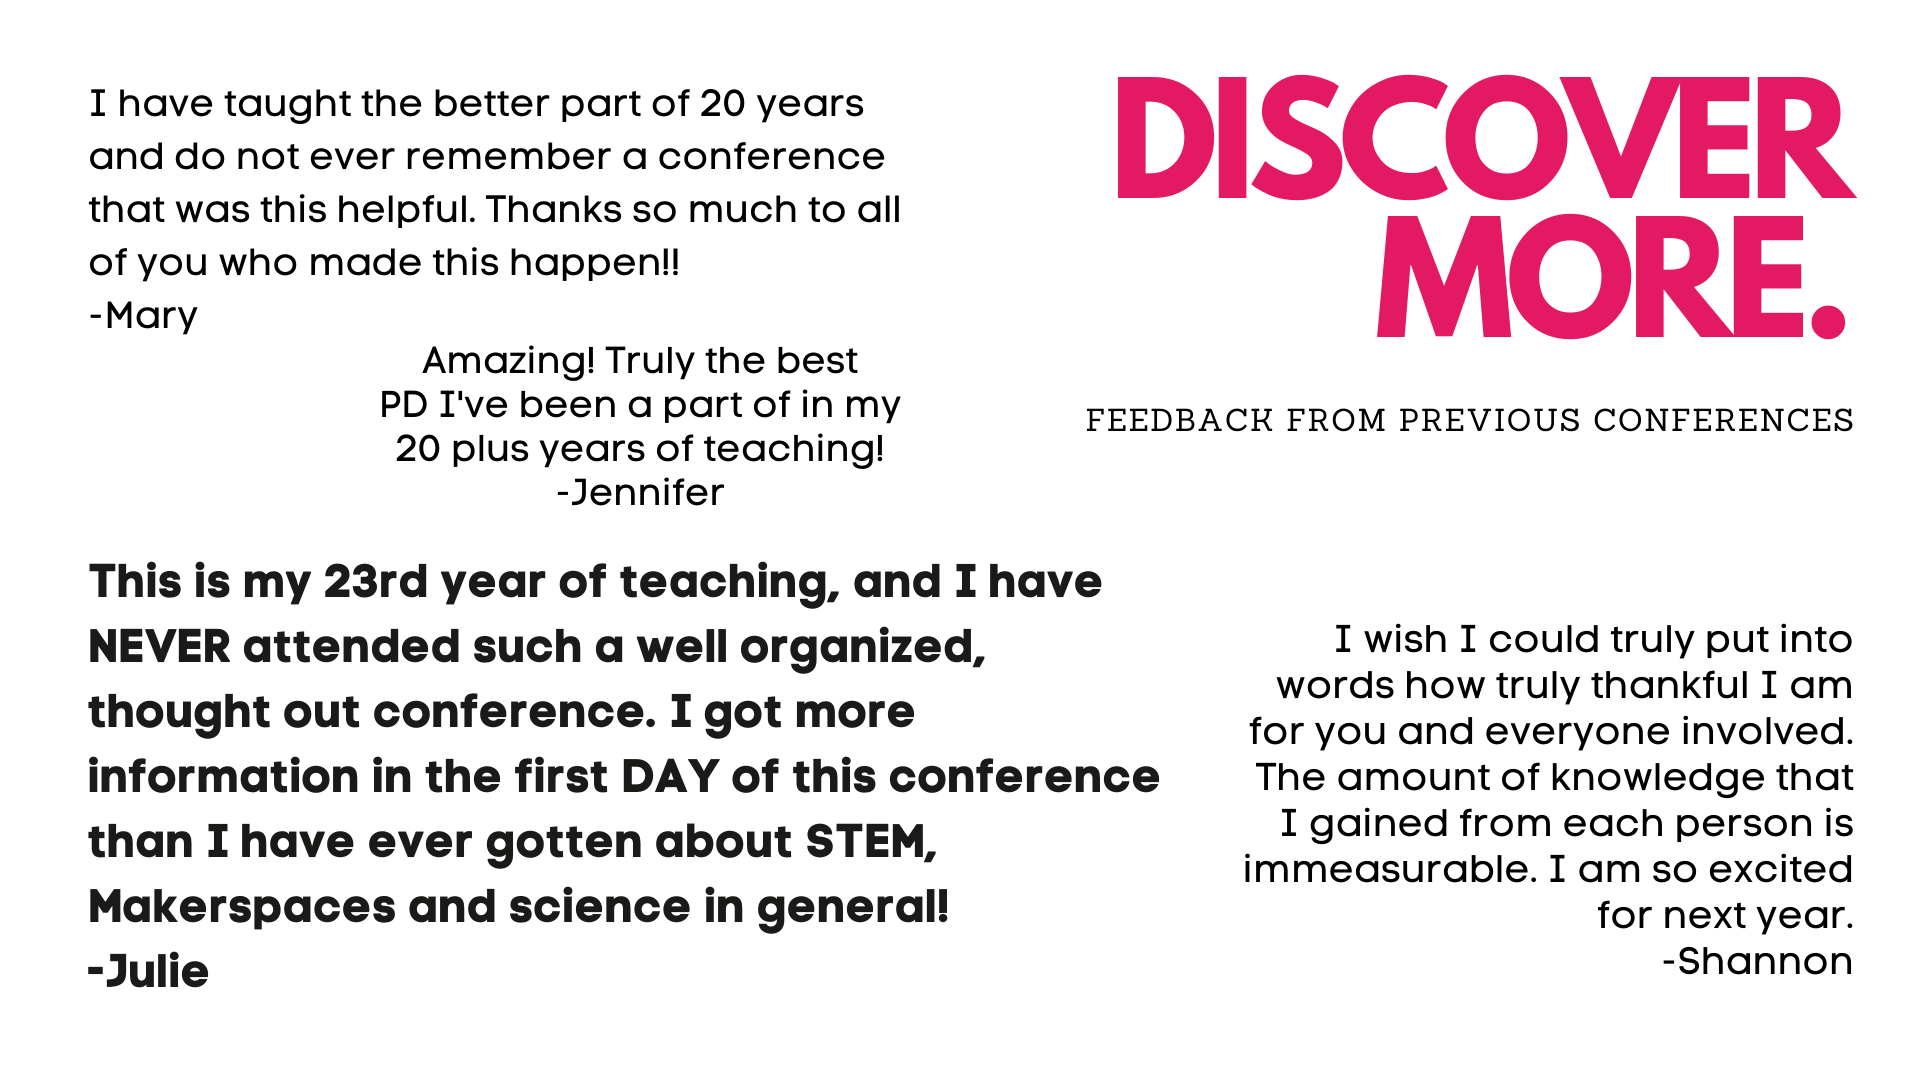 Discover - "This is my 23rd year of teaching, and I have NEVER attended such a well organized, thought out conference. I got more information in the first DAY of this conference than I have ever gotten about STEM..." - Julie